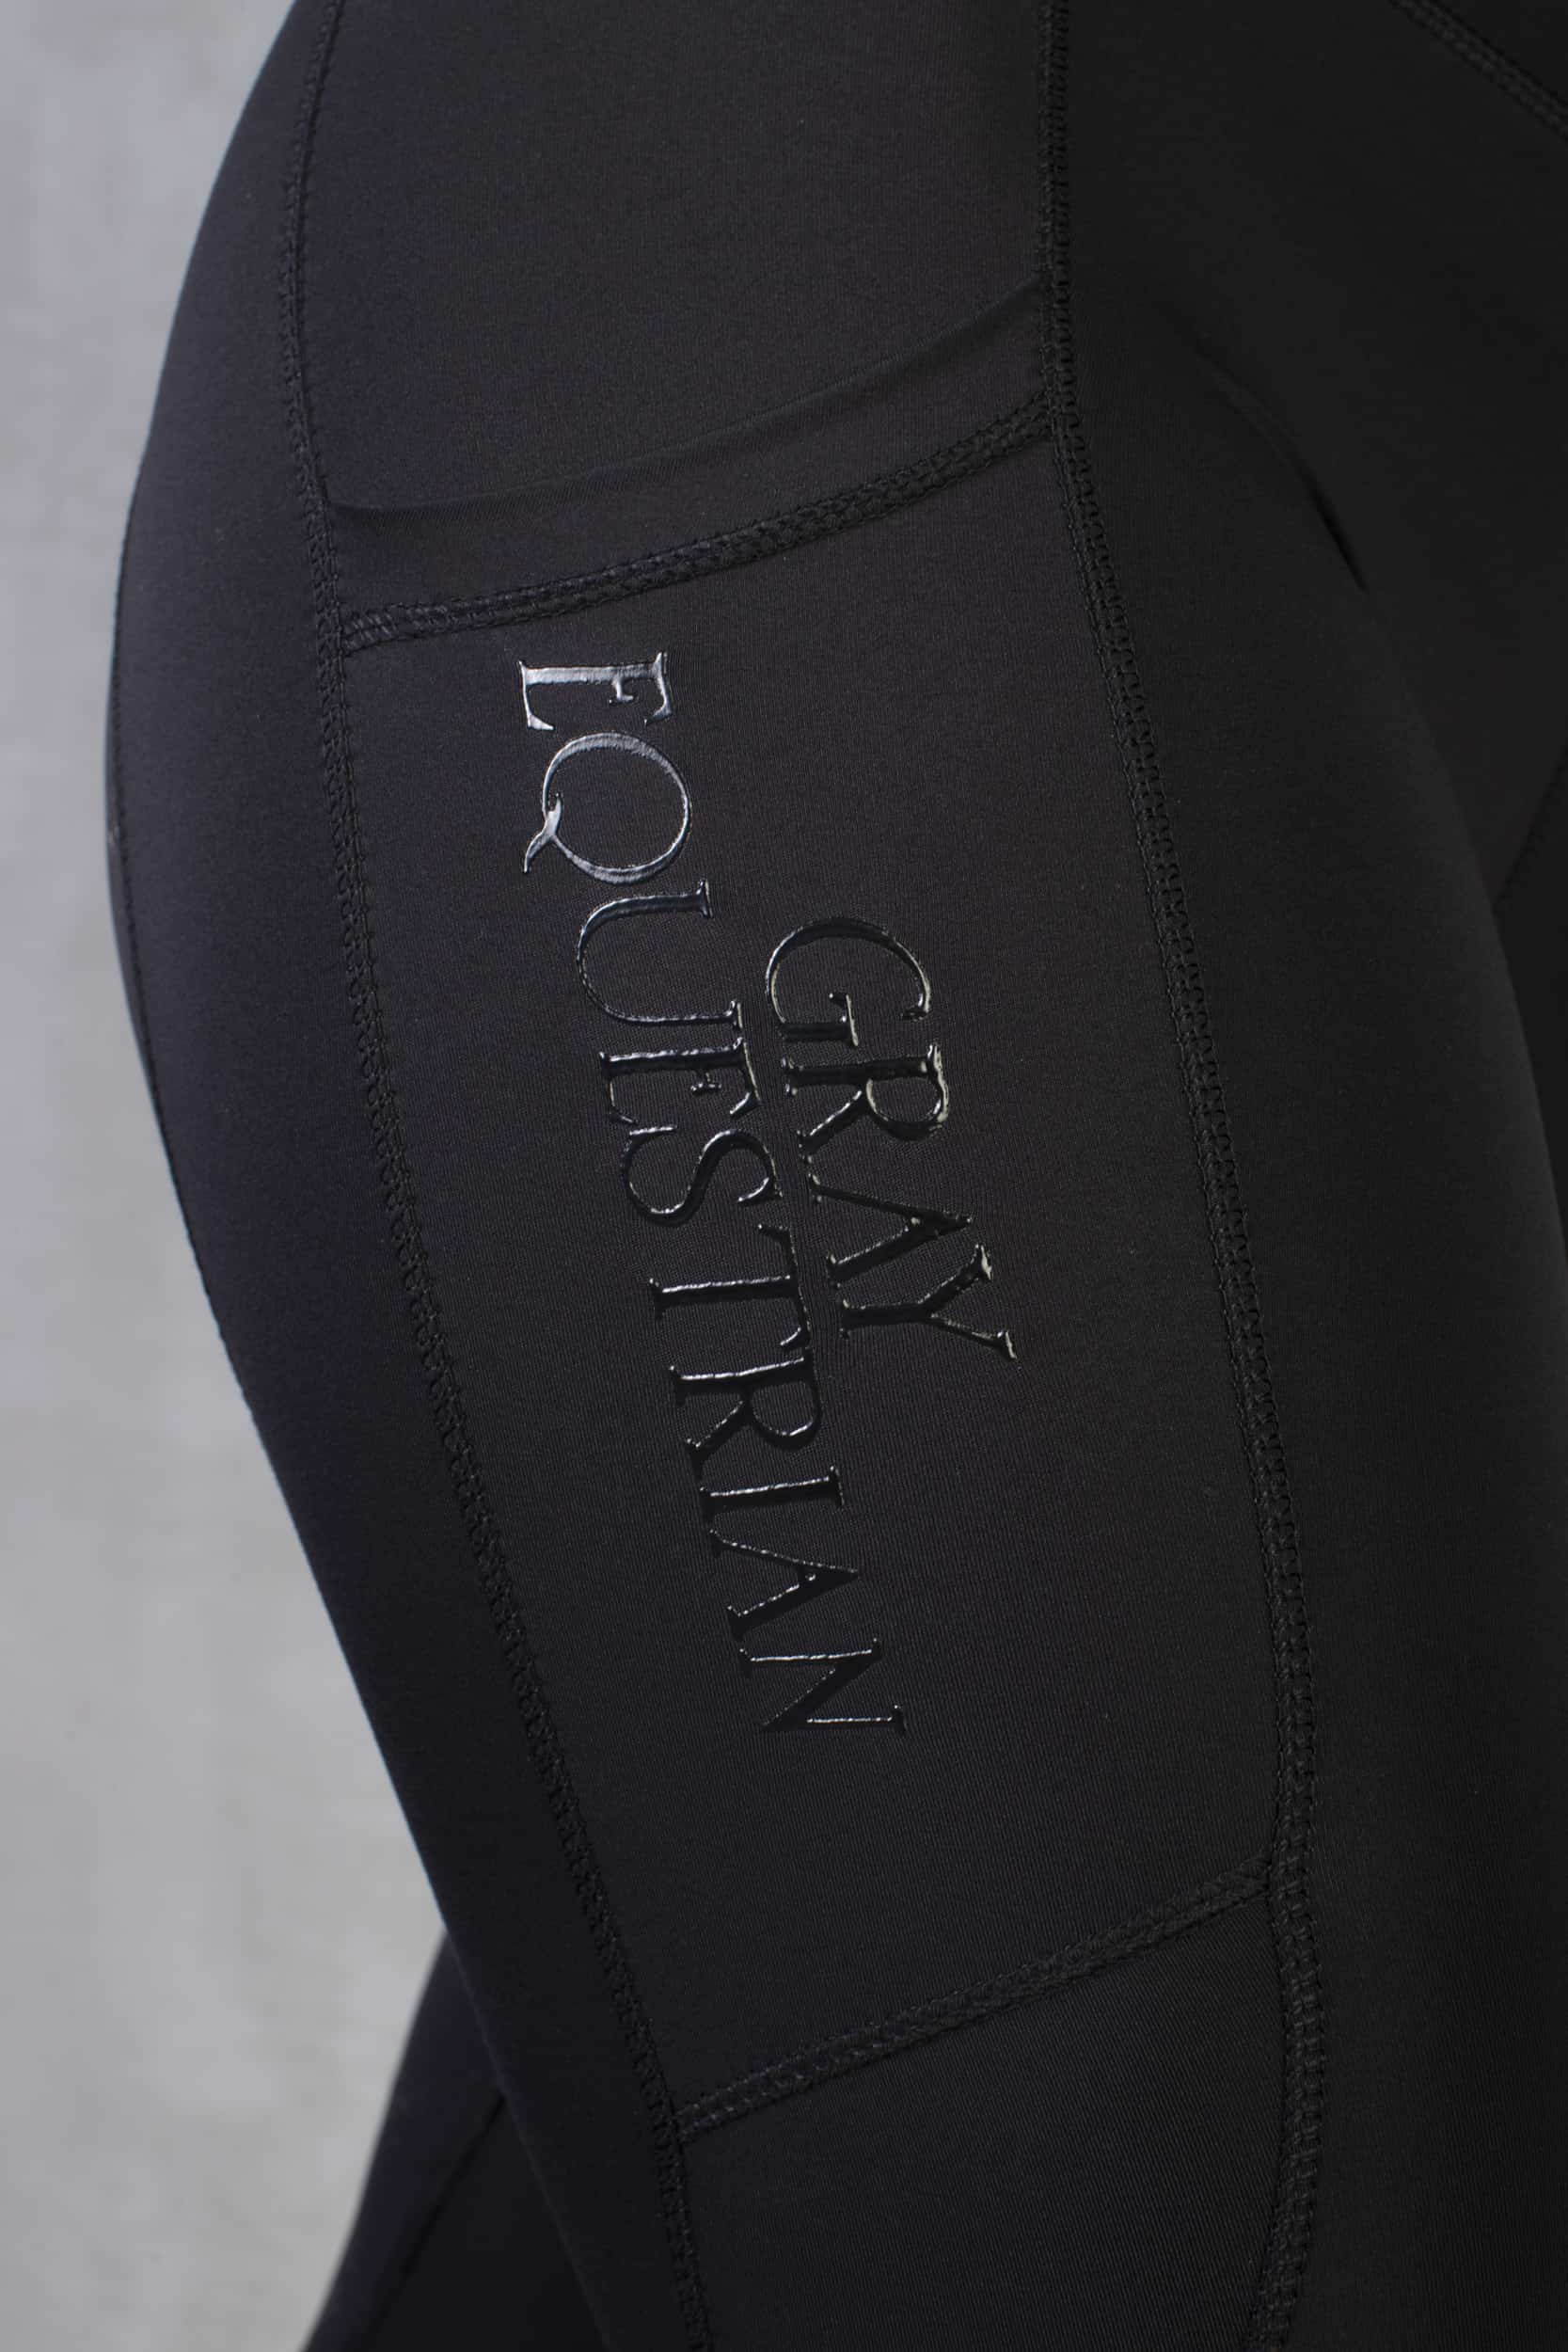 A close up of the phone pocket and gloss Grey Equestrian detailing.